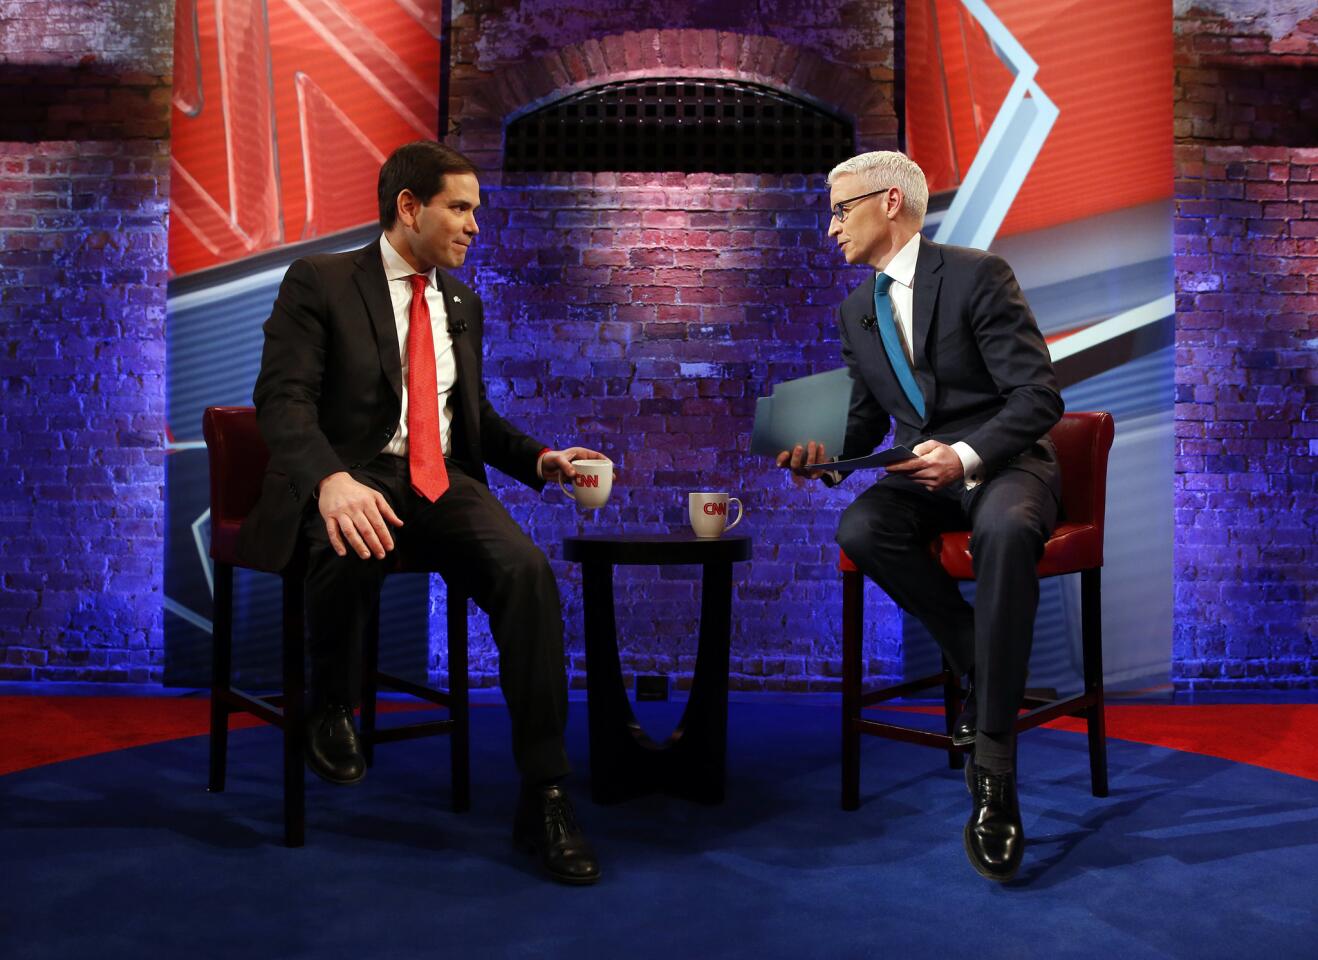 Marco Rubio and Anderson Cooper